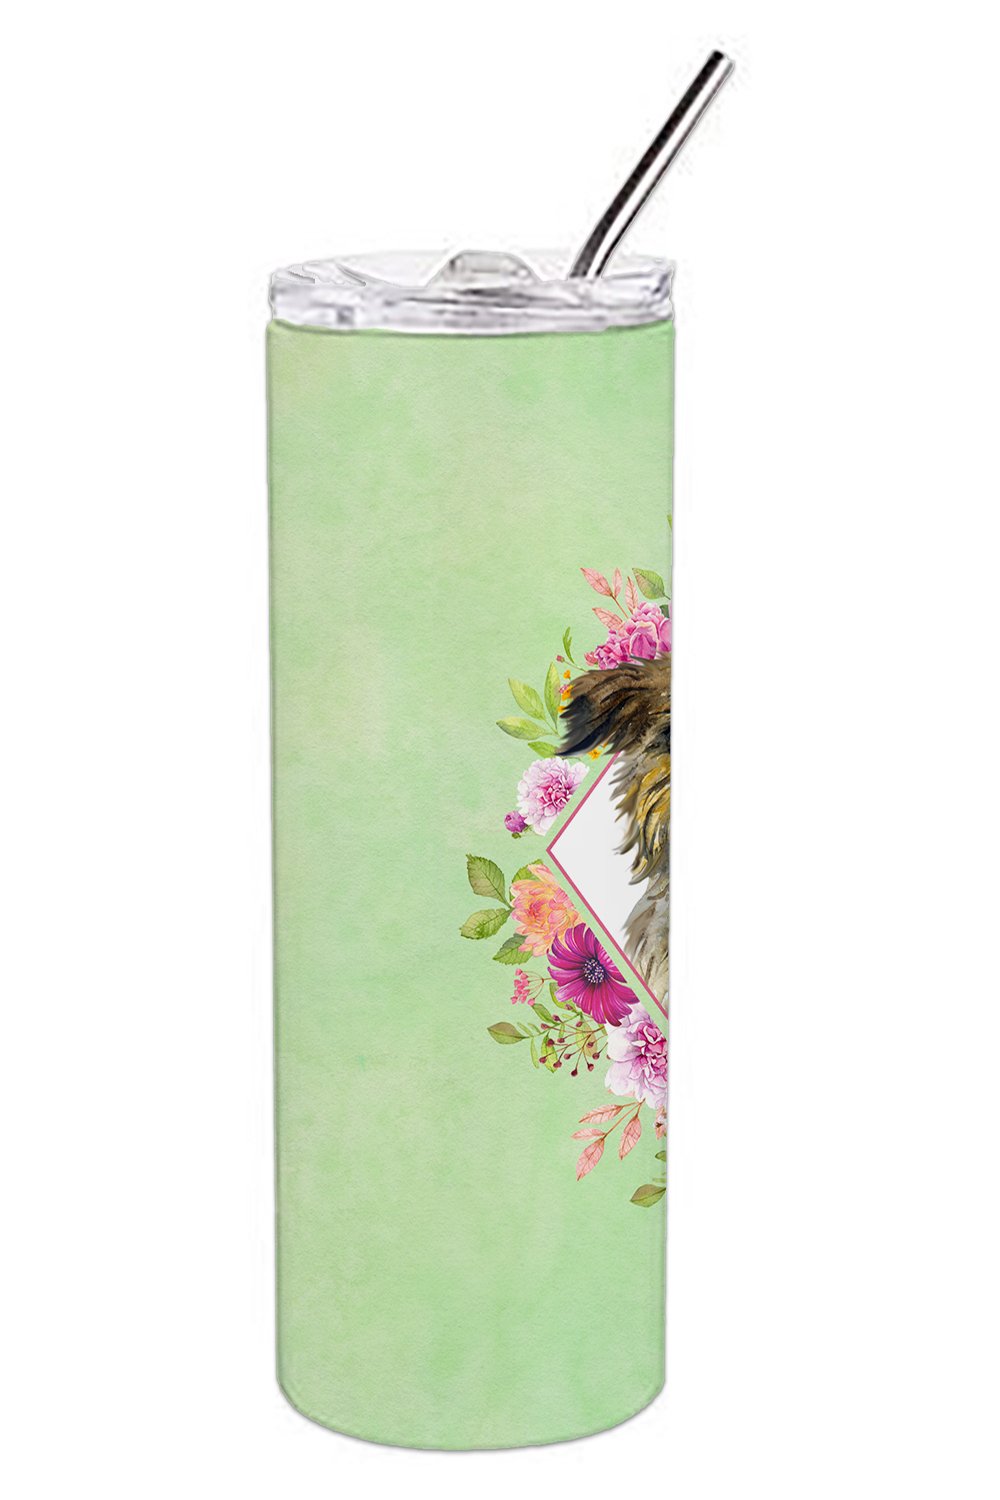 Brussels Griffon Green Flowers Double Walled Stainless Steel 20 oz Skinny Tumbler CK4283TBL20 by Caroline's Treasures